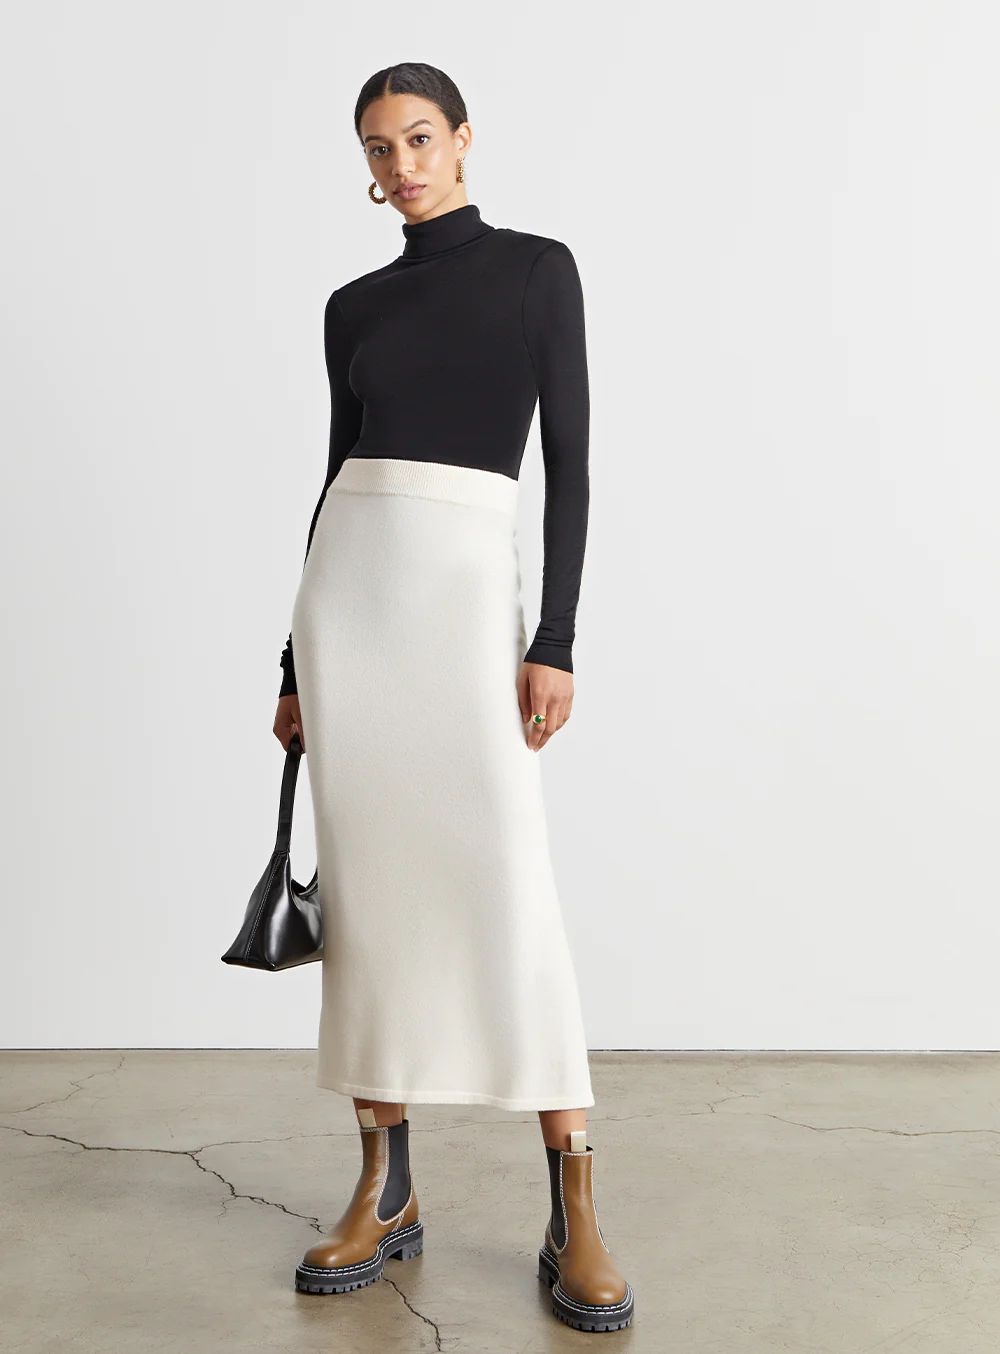 Mollie Knit Skirt | Who What Wear Collection